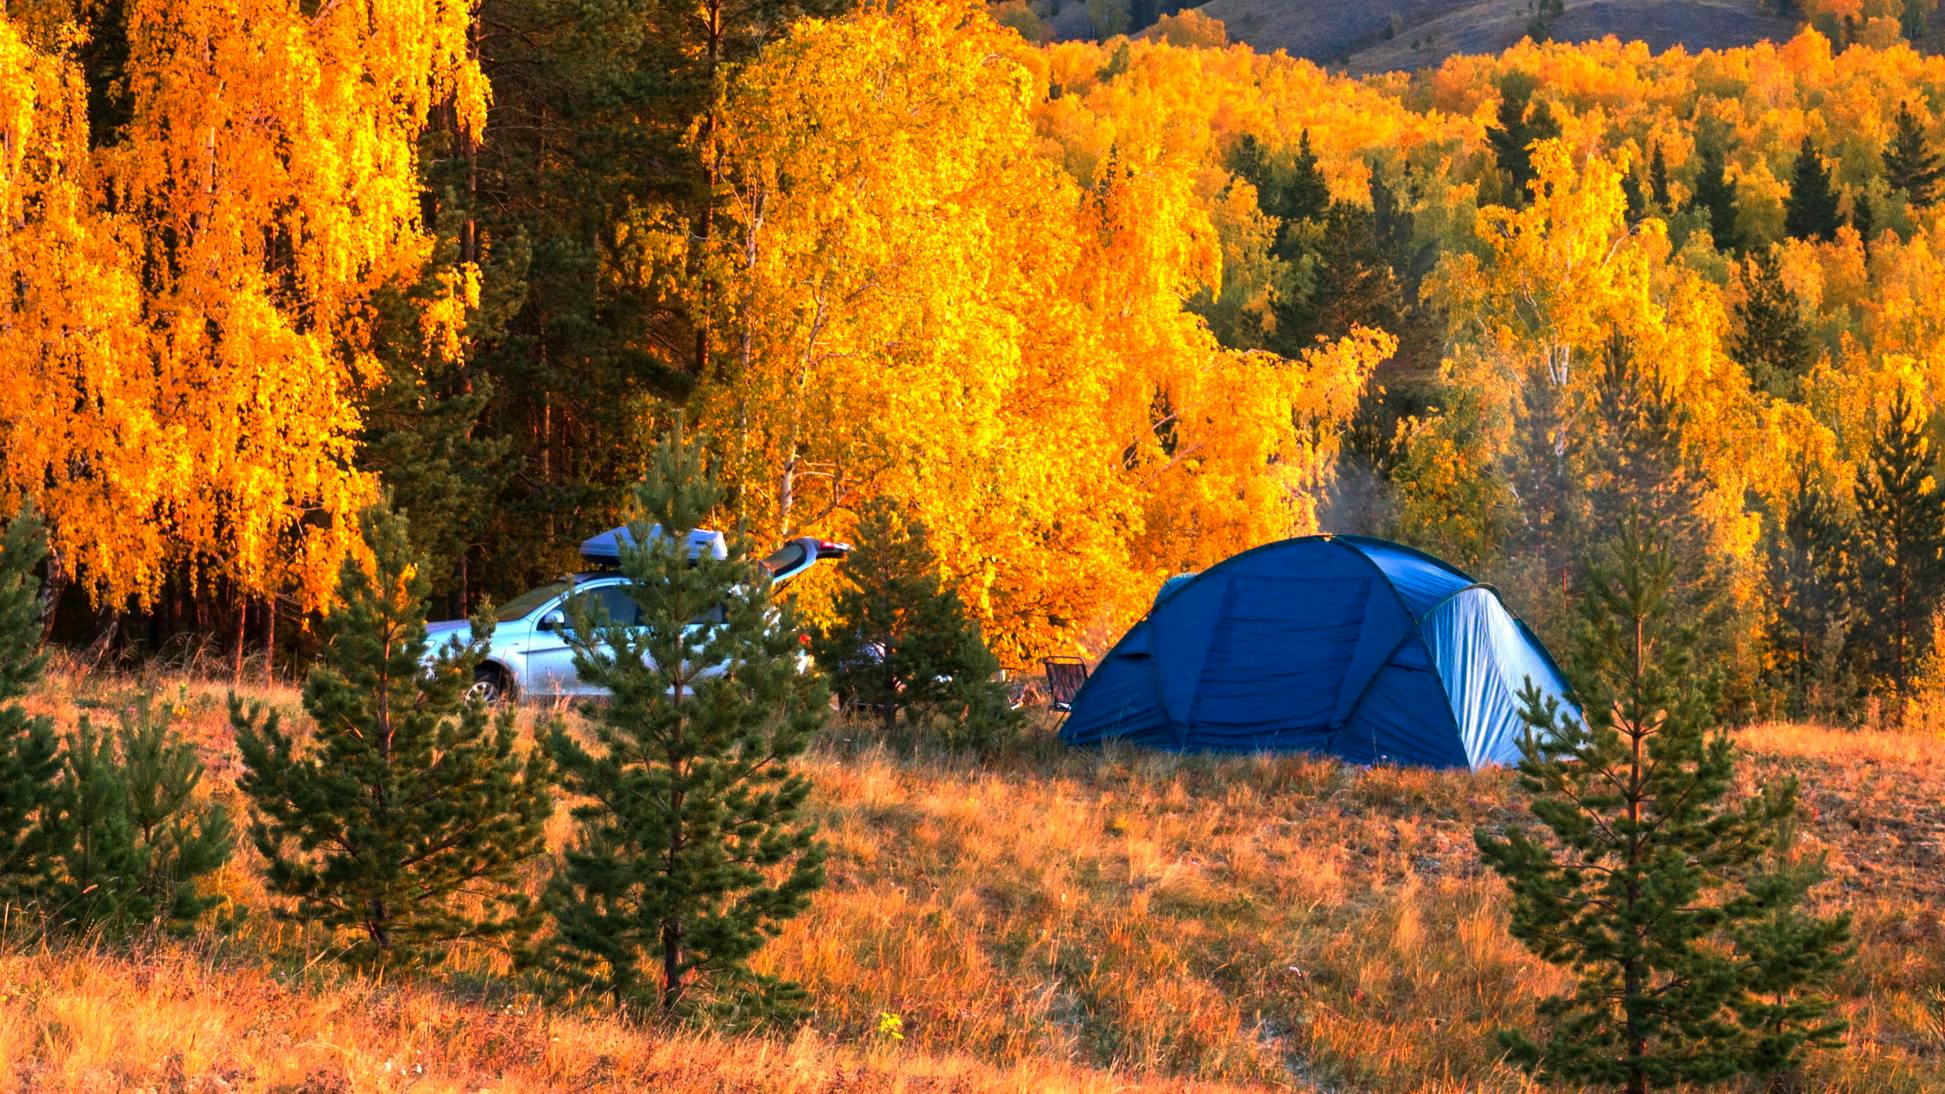 A large tent is pitched in a fall landscape.